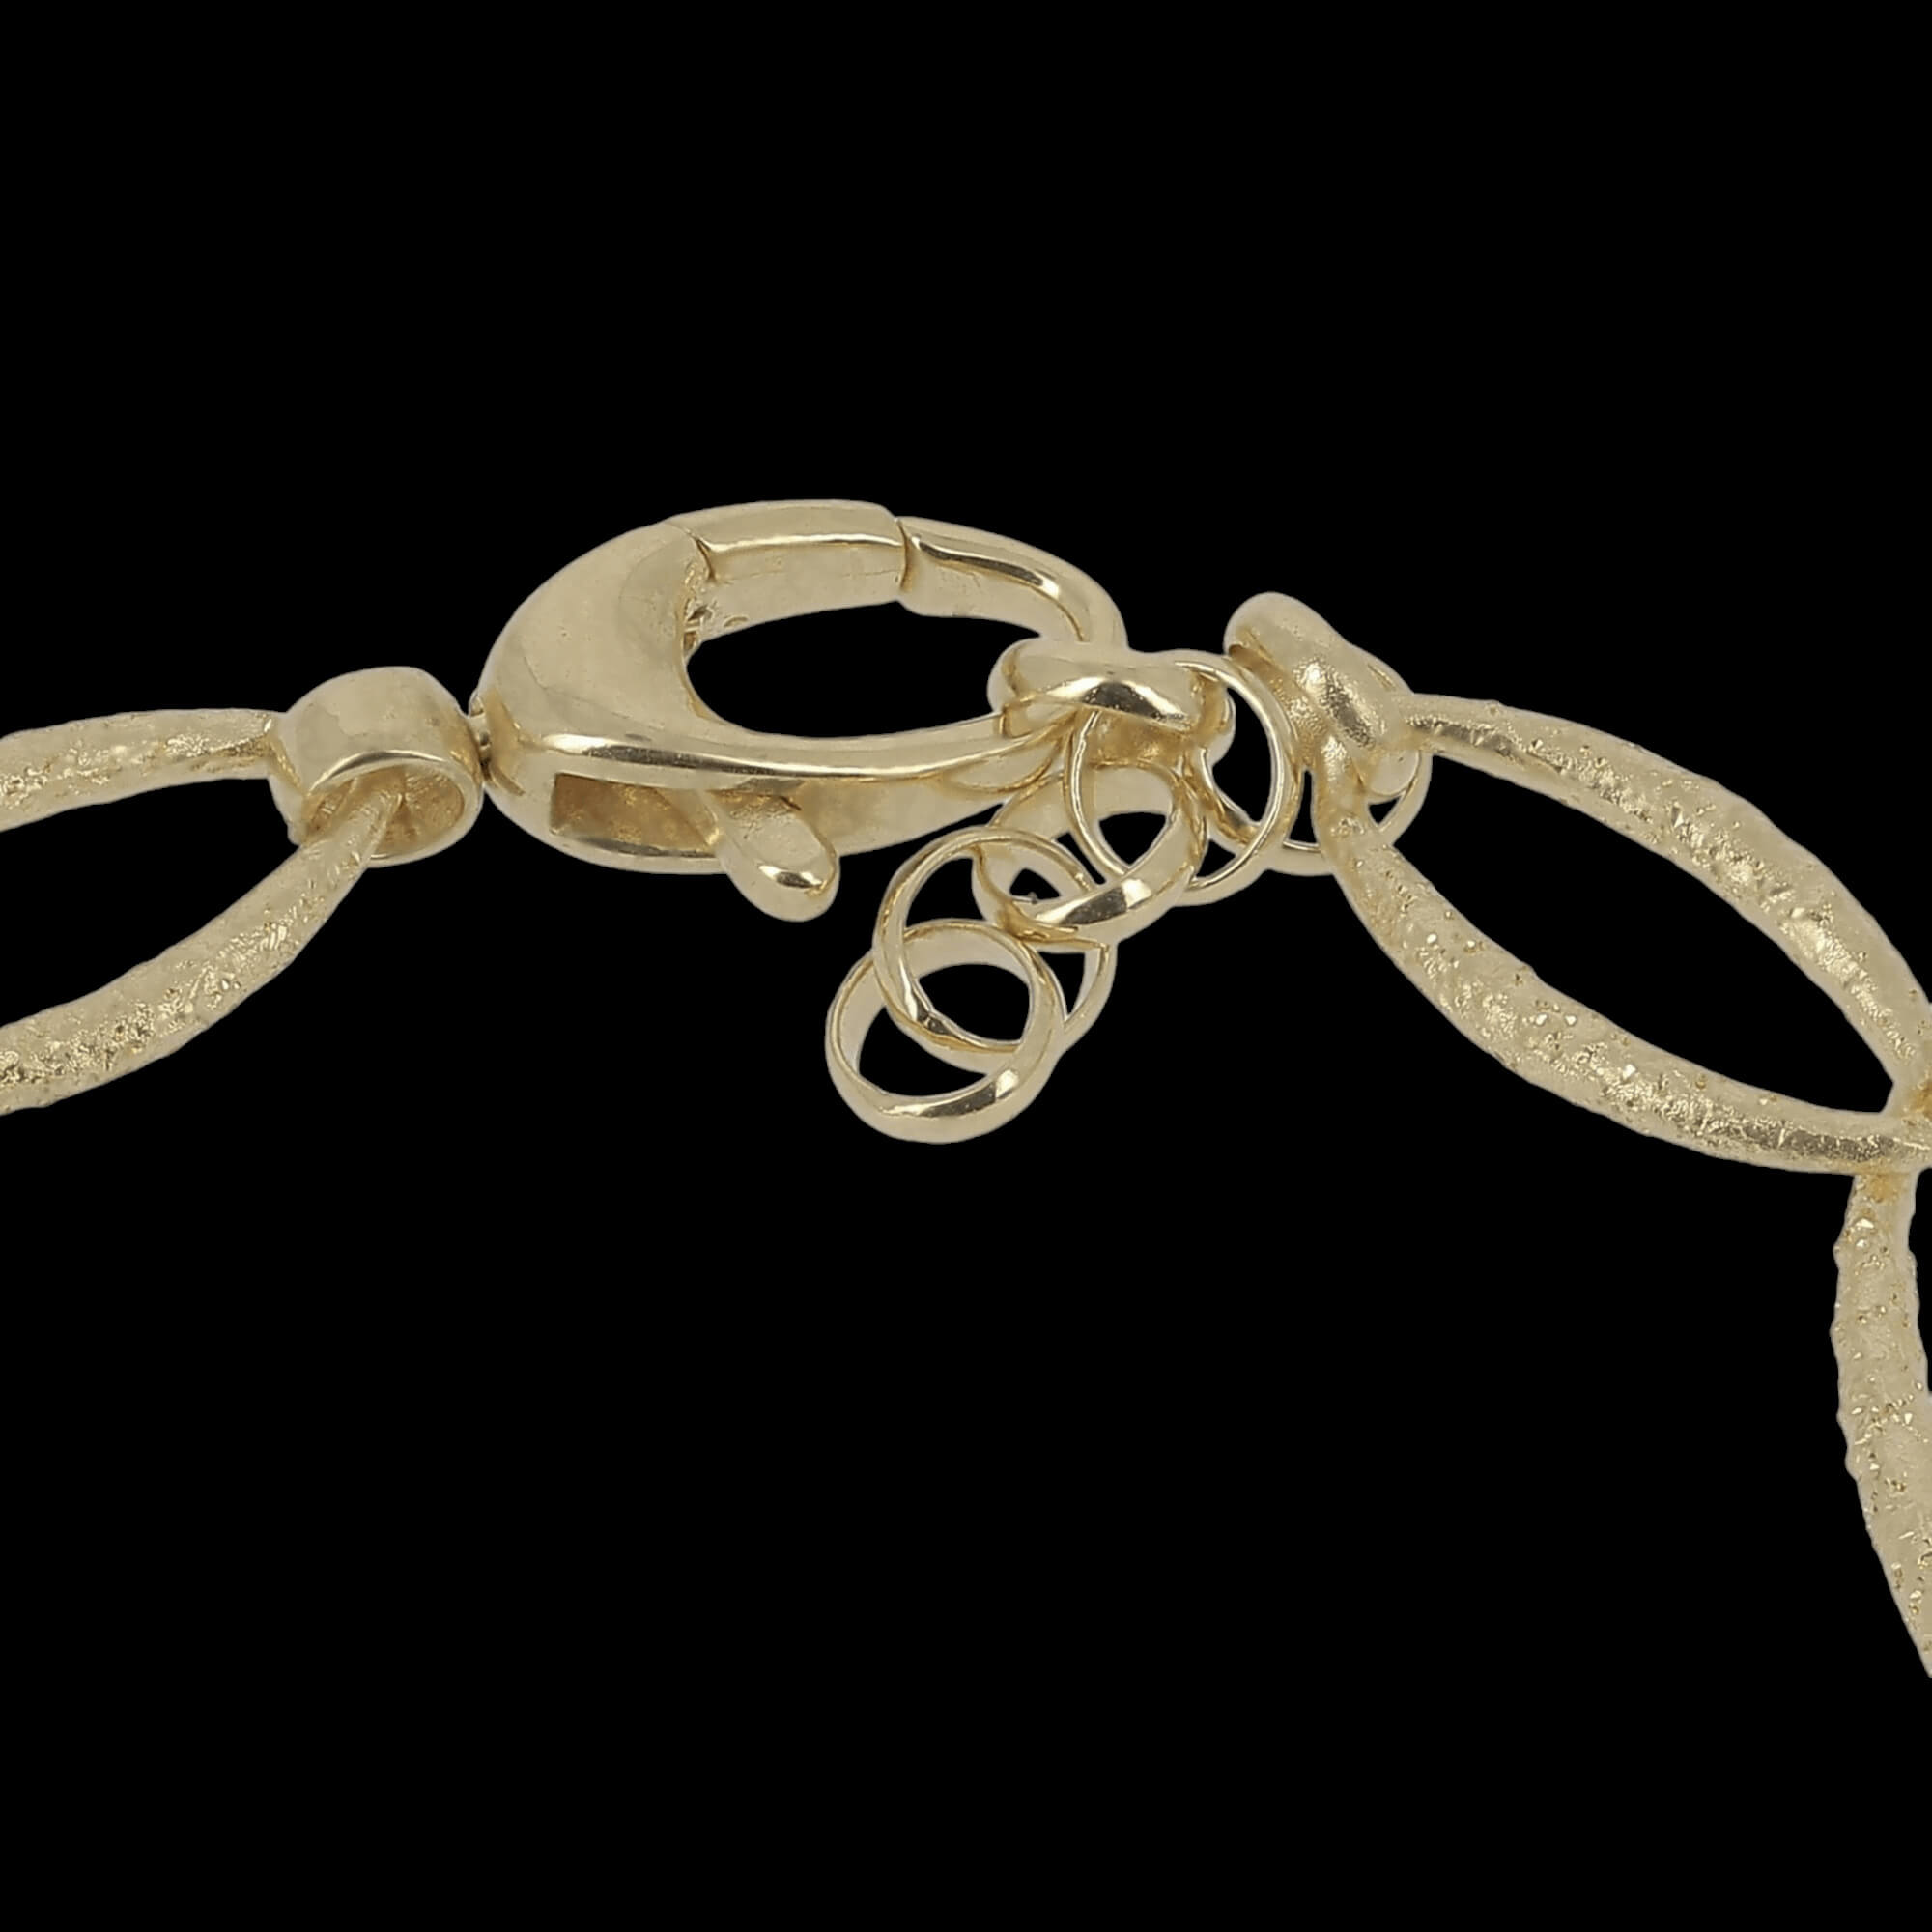 Gold-plated, beautiful and refined link bracelet